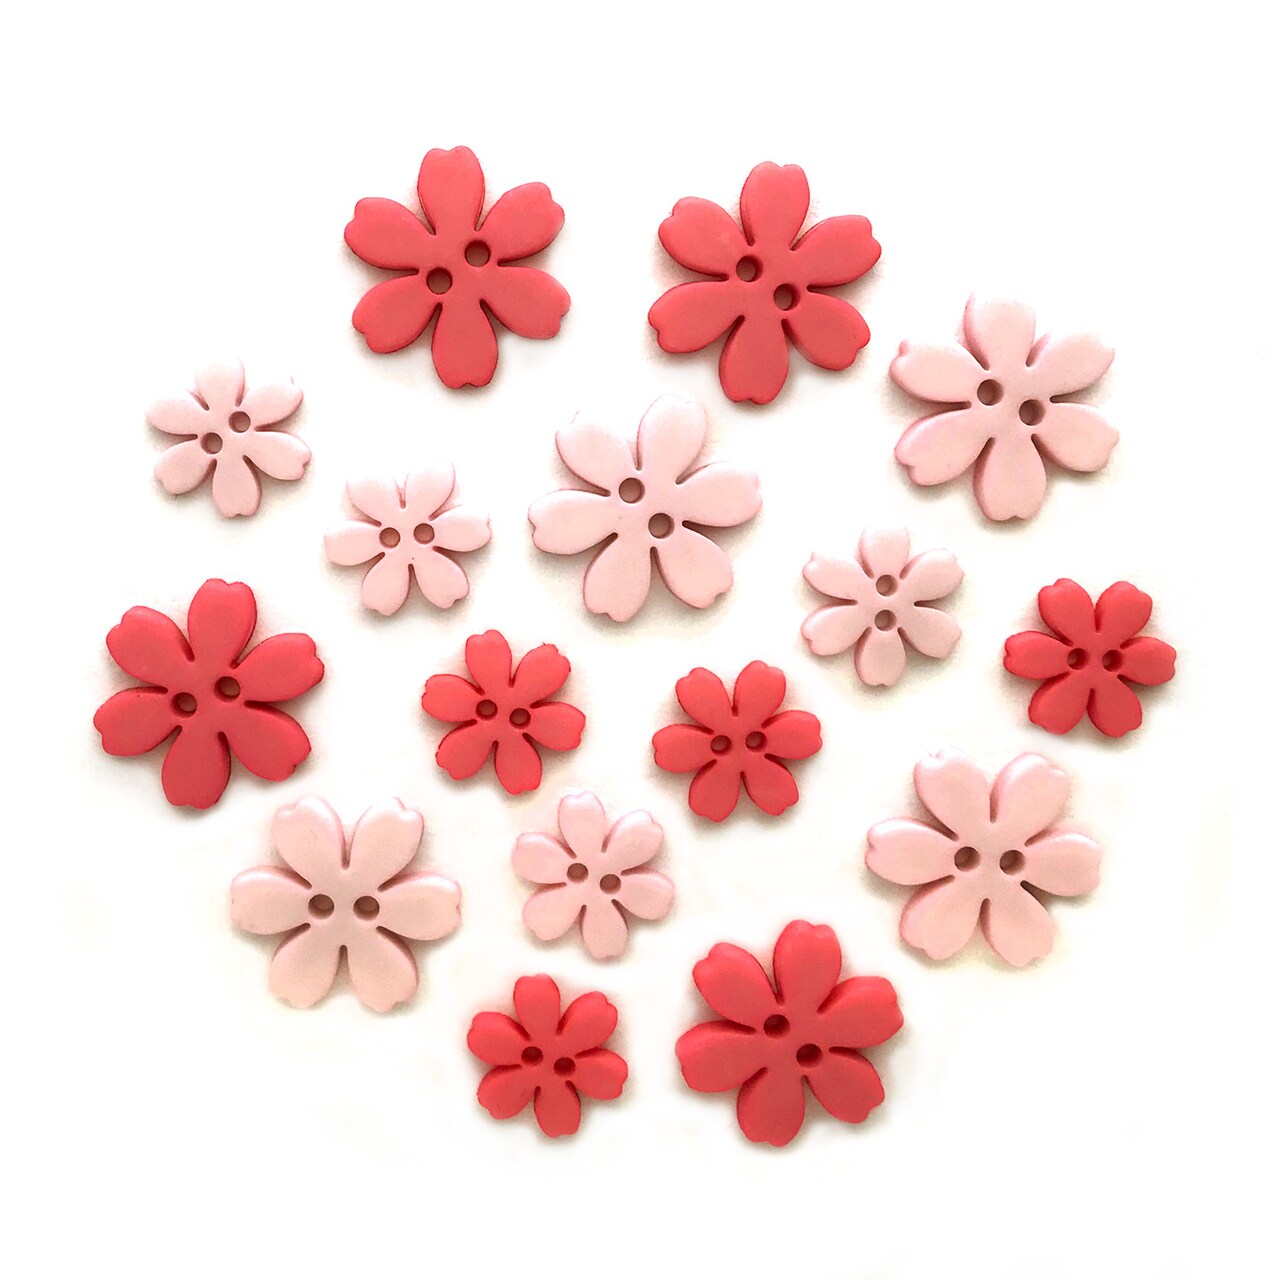 Buttons Galore and More Flower Shaped Novelty Buttons for Sewing &#x26; Craft - 48 Buttons